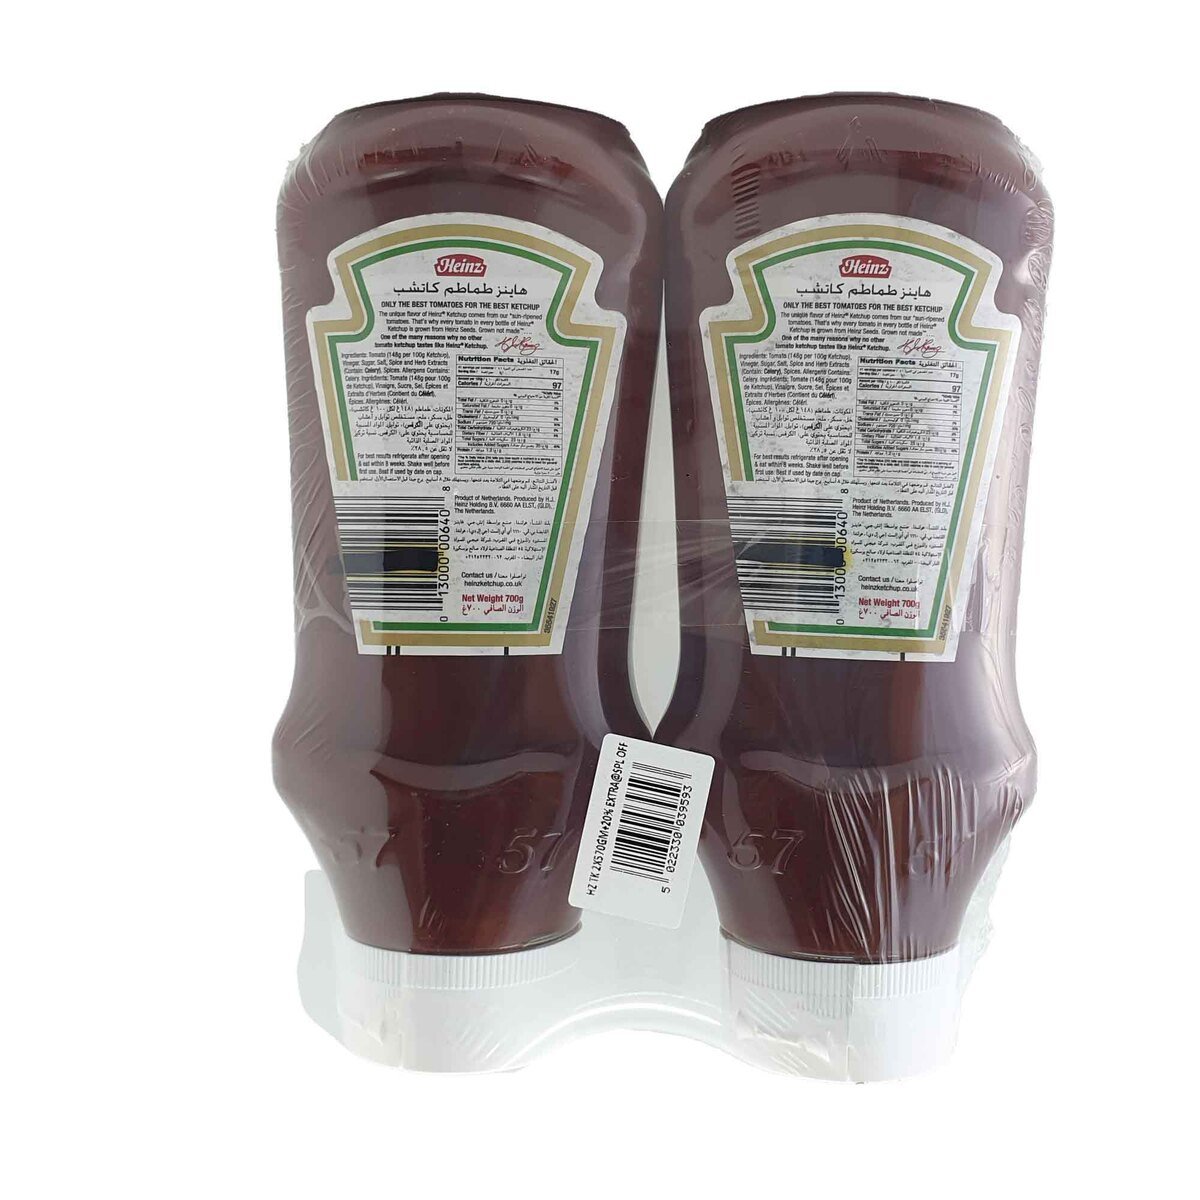 Heinz Tomato Ketchup Value Pack 2 x 570 g